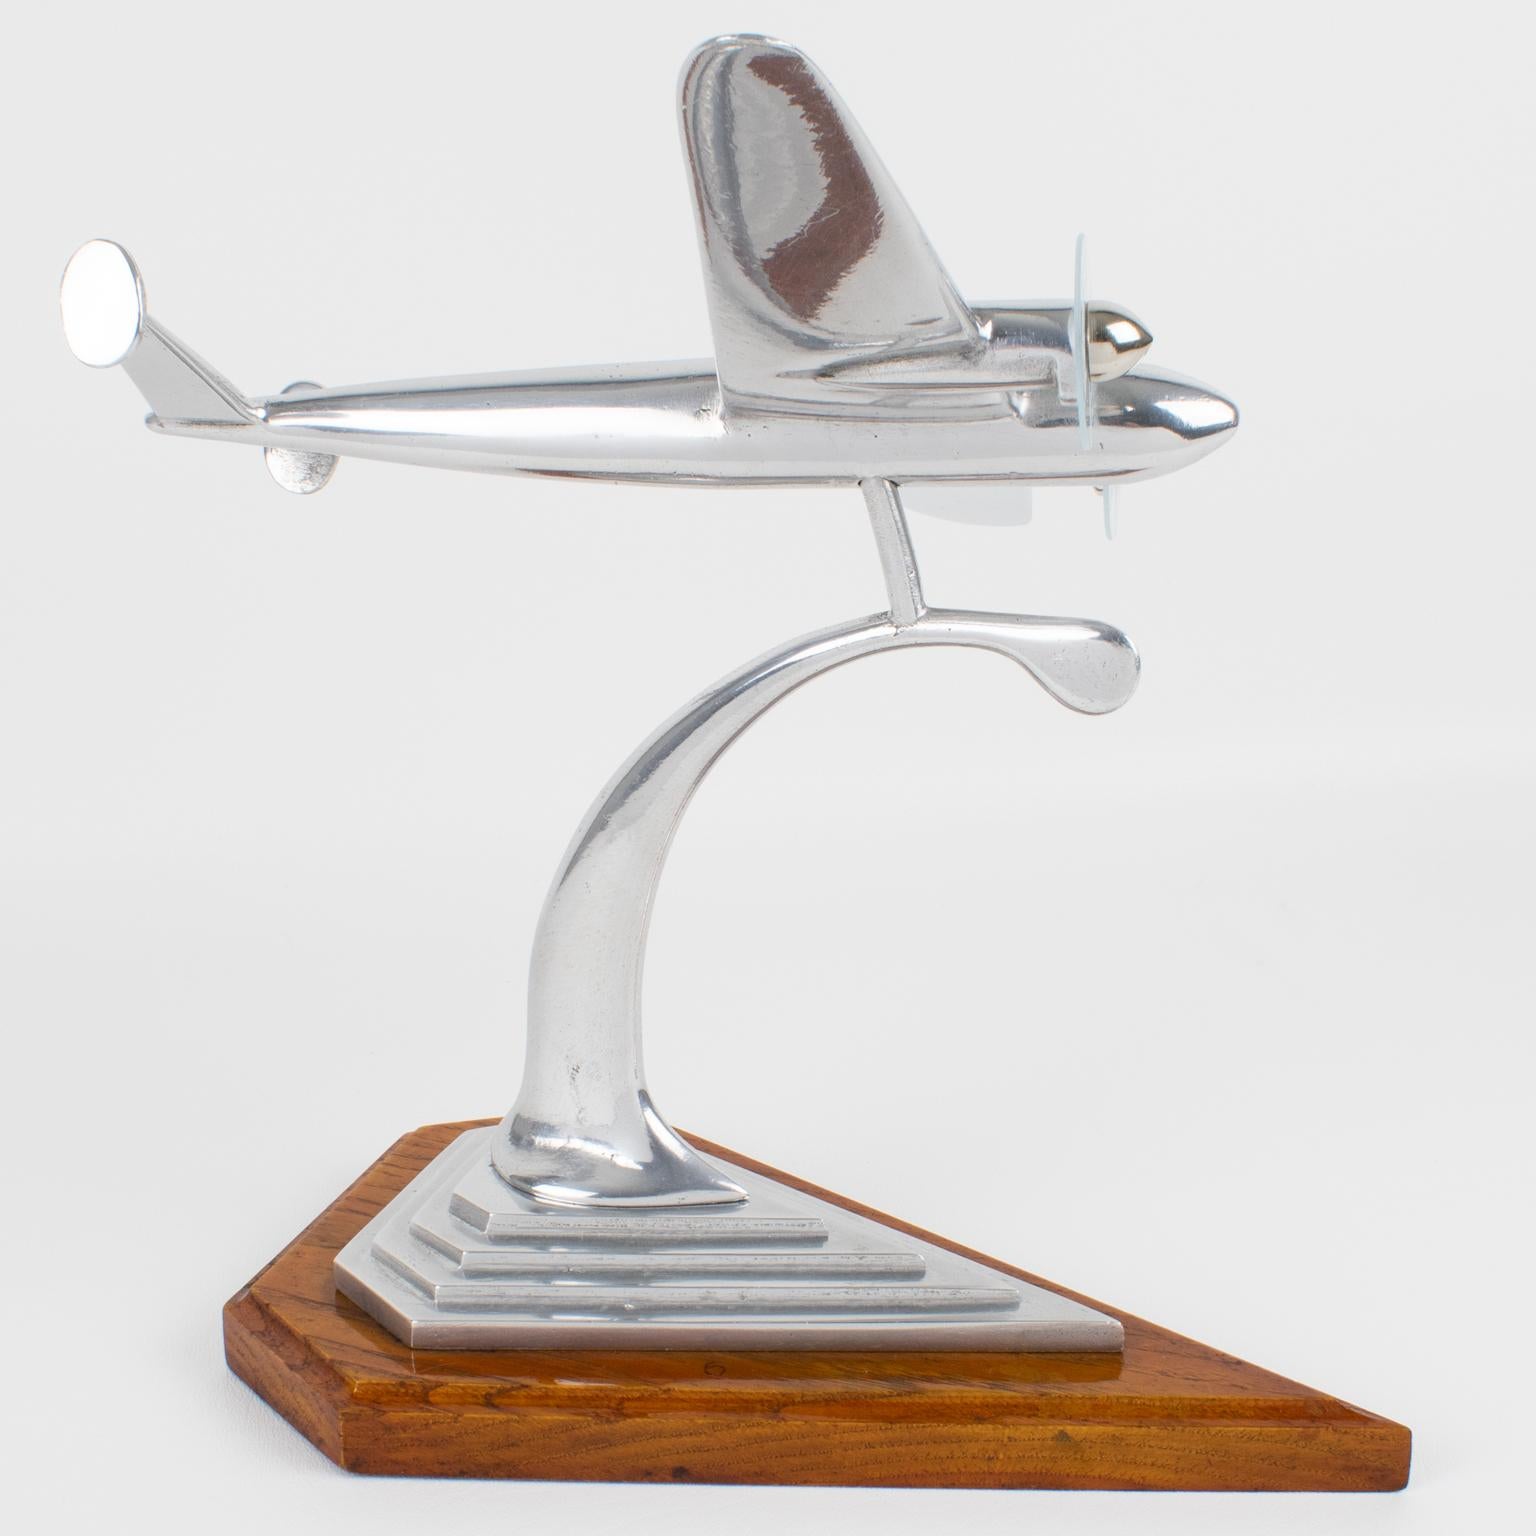 Art Deco Aviation Cast Aluminum and Wood Airplane Model, France 1940s